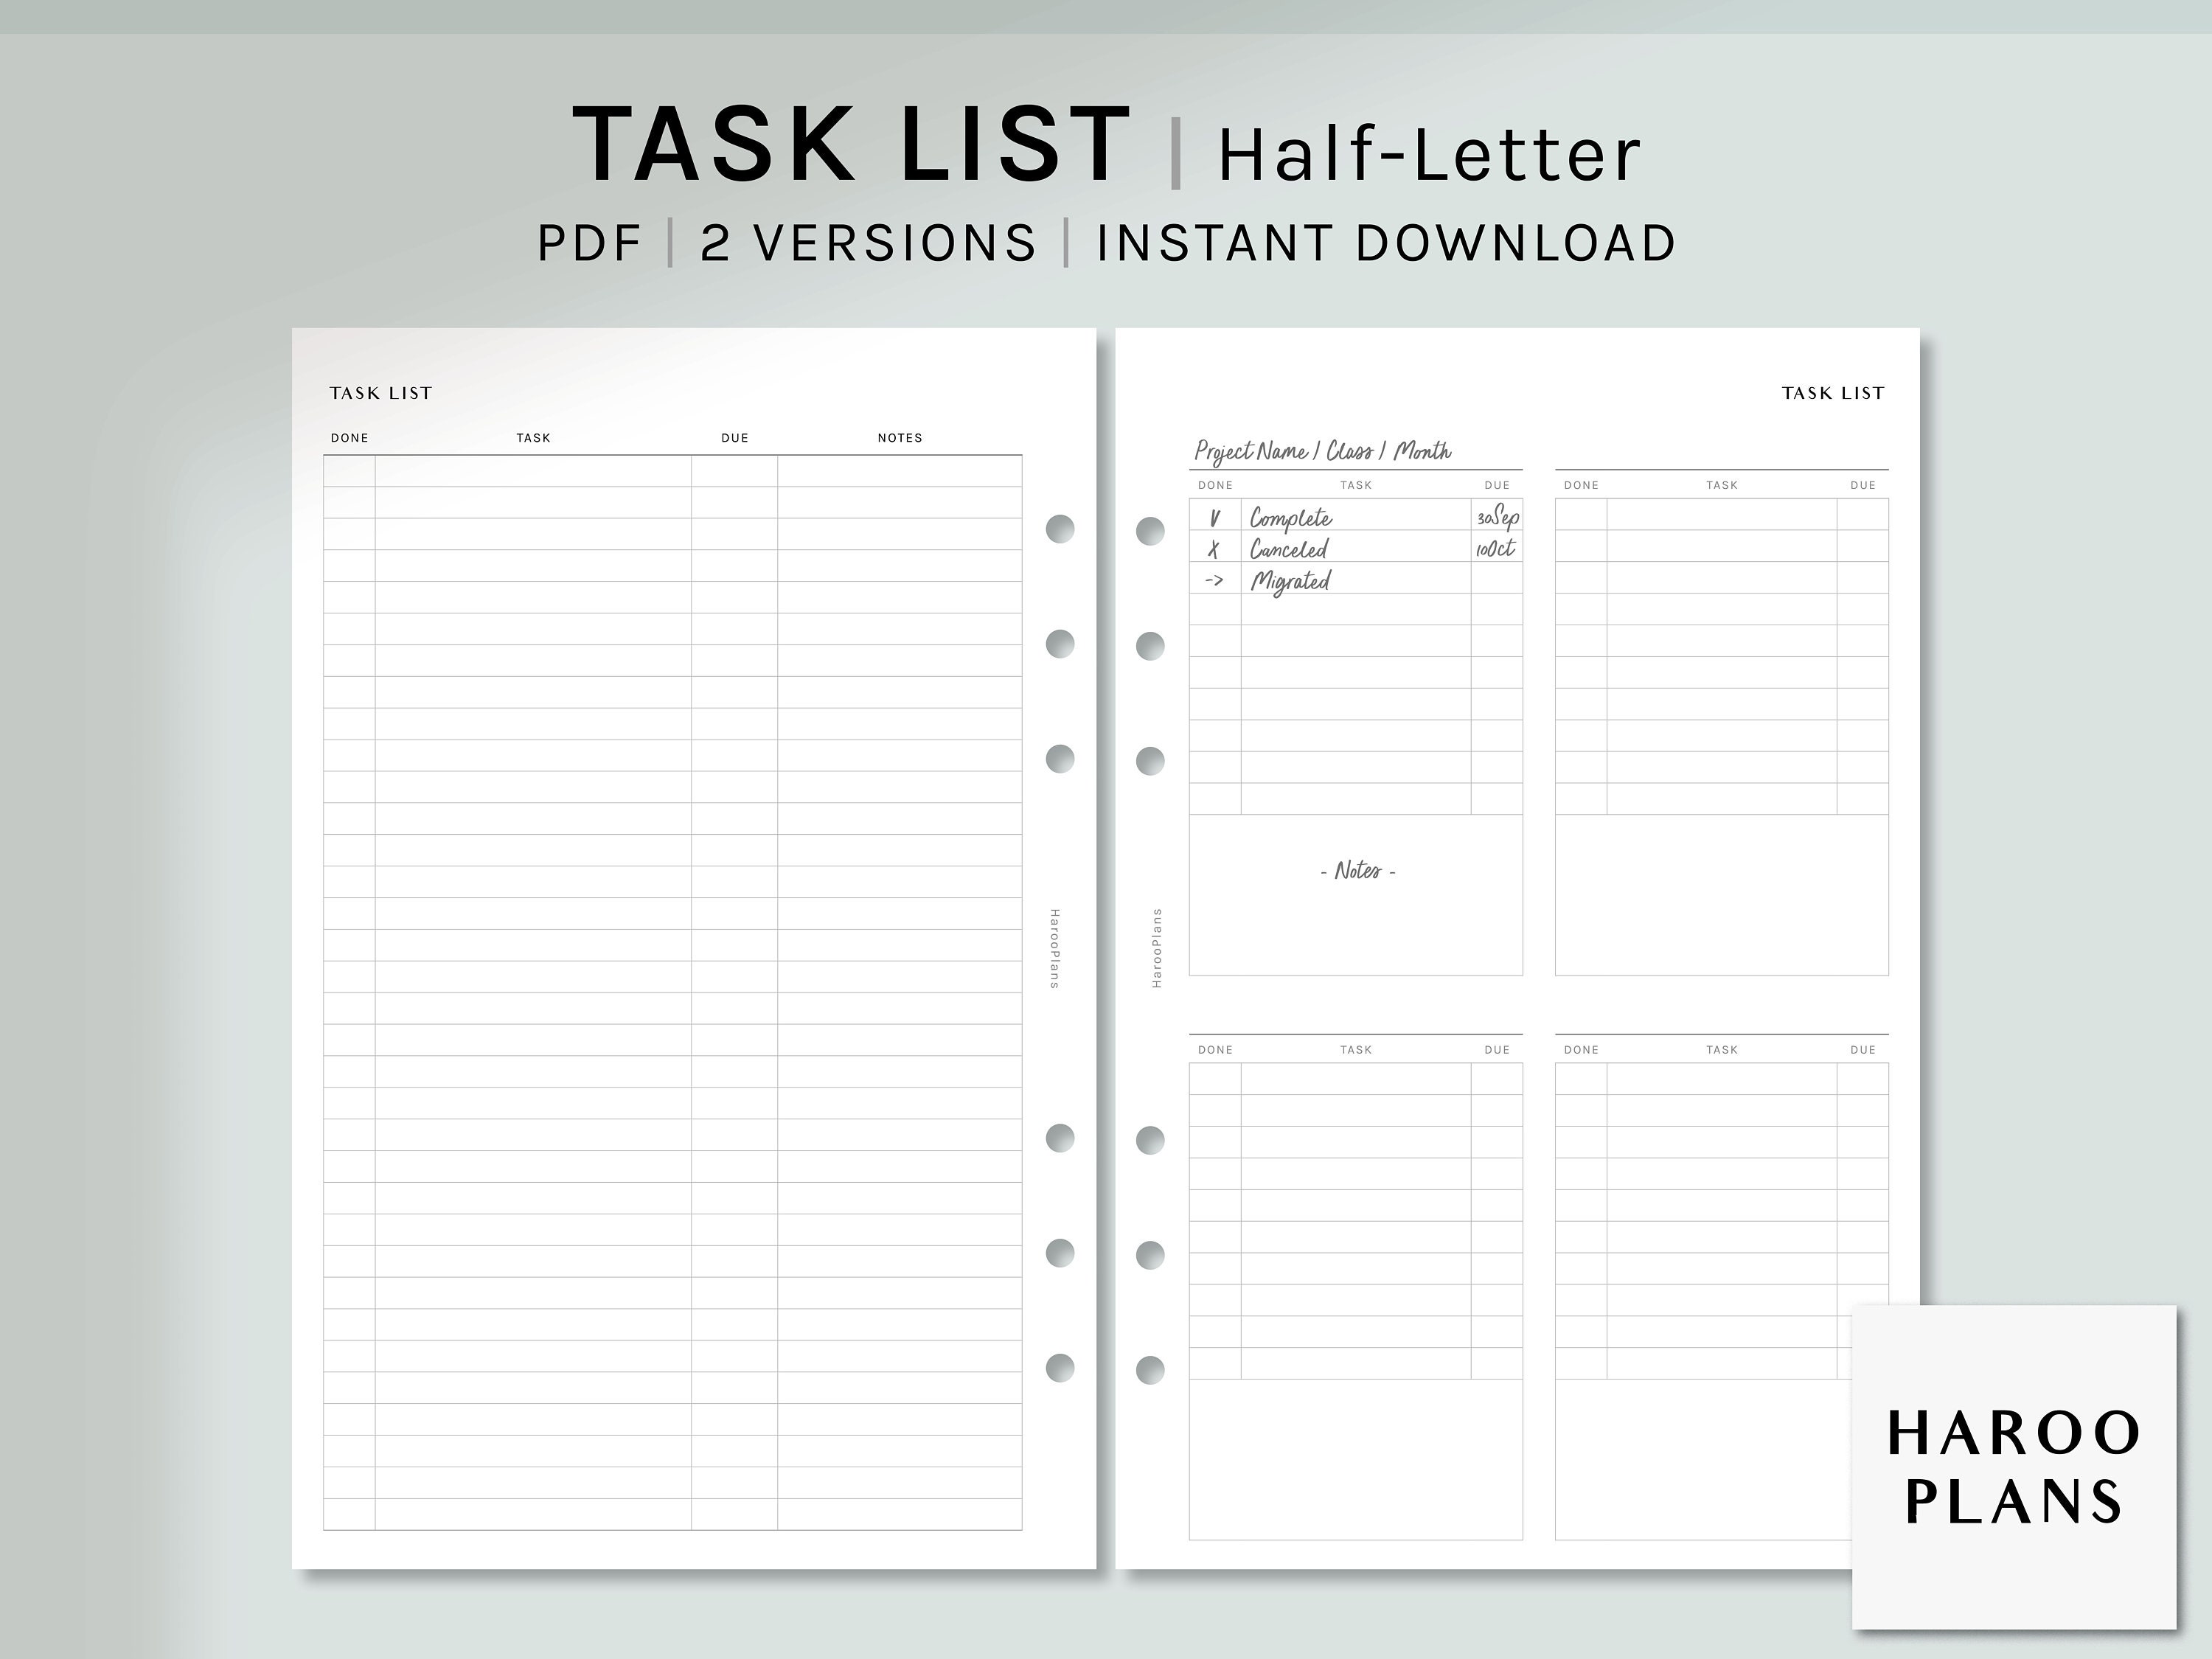 A5 Running To Do List Planner Inserts Printable Download - Letter / A4 –  MarianeCresp